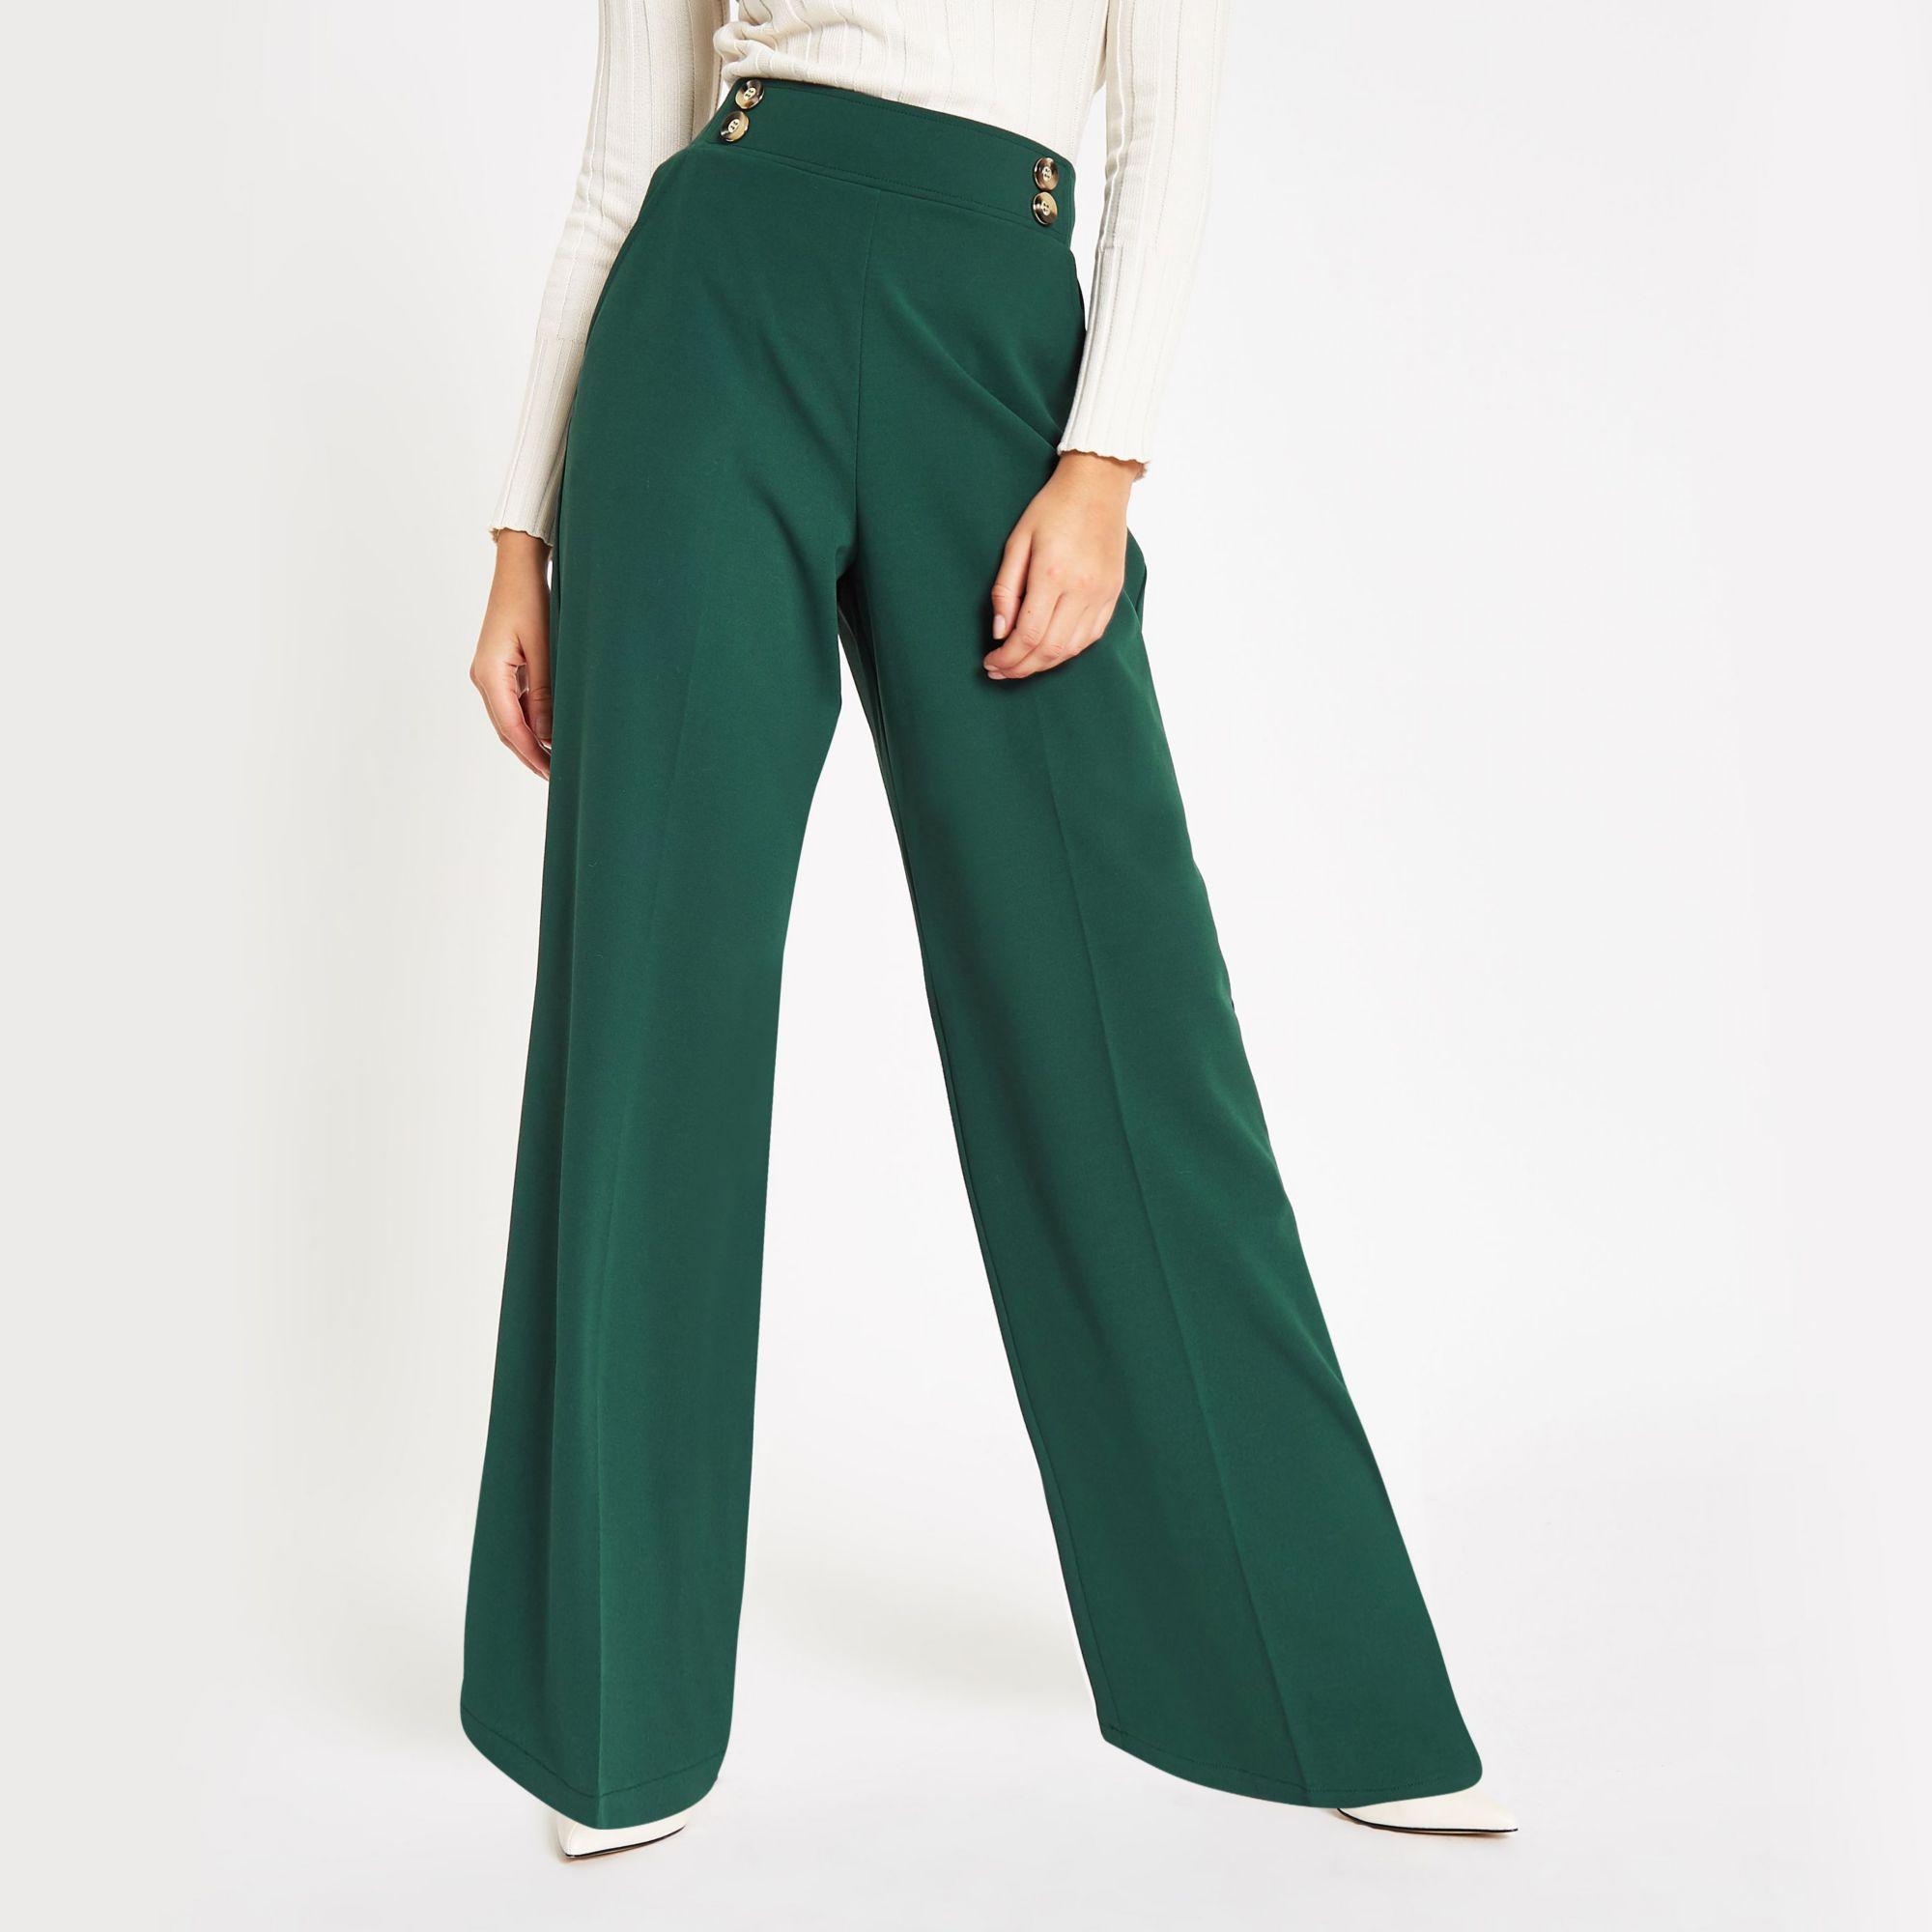 How to Style Wide Leg Trousers for Fall and Winter